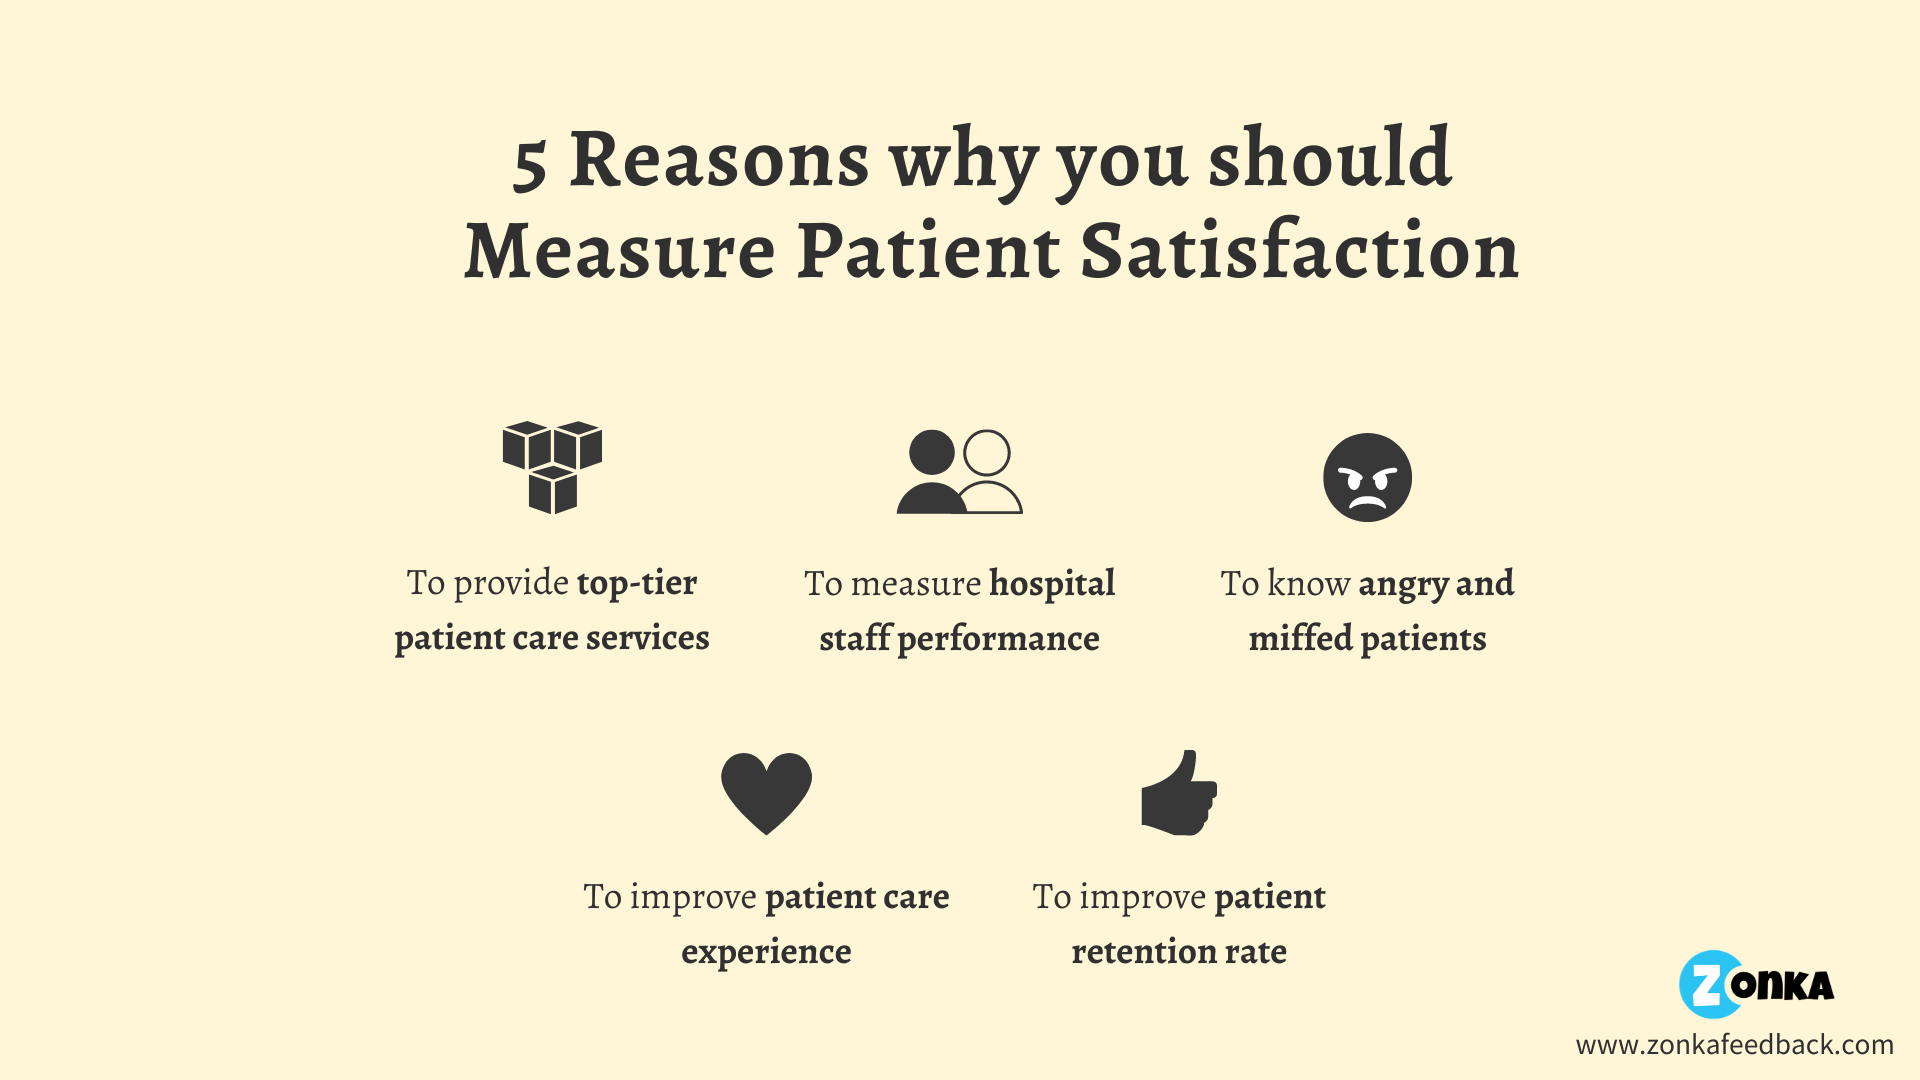 5-reasons-why-measure-patient-satisfaction